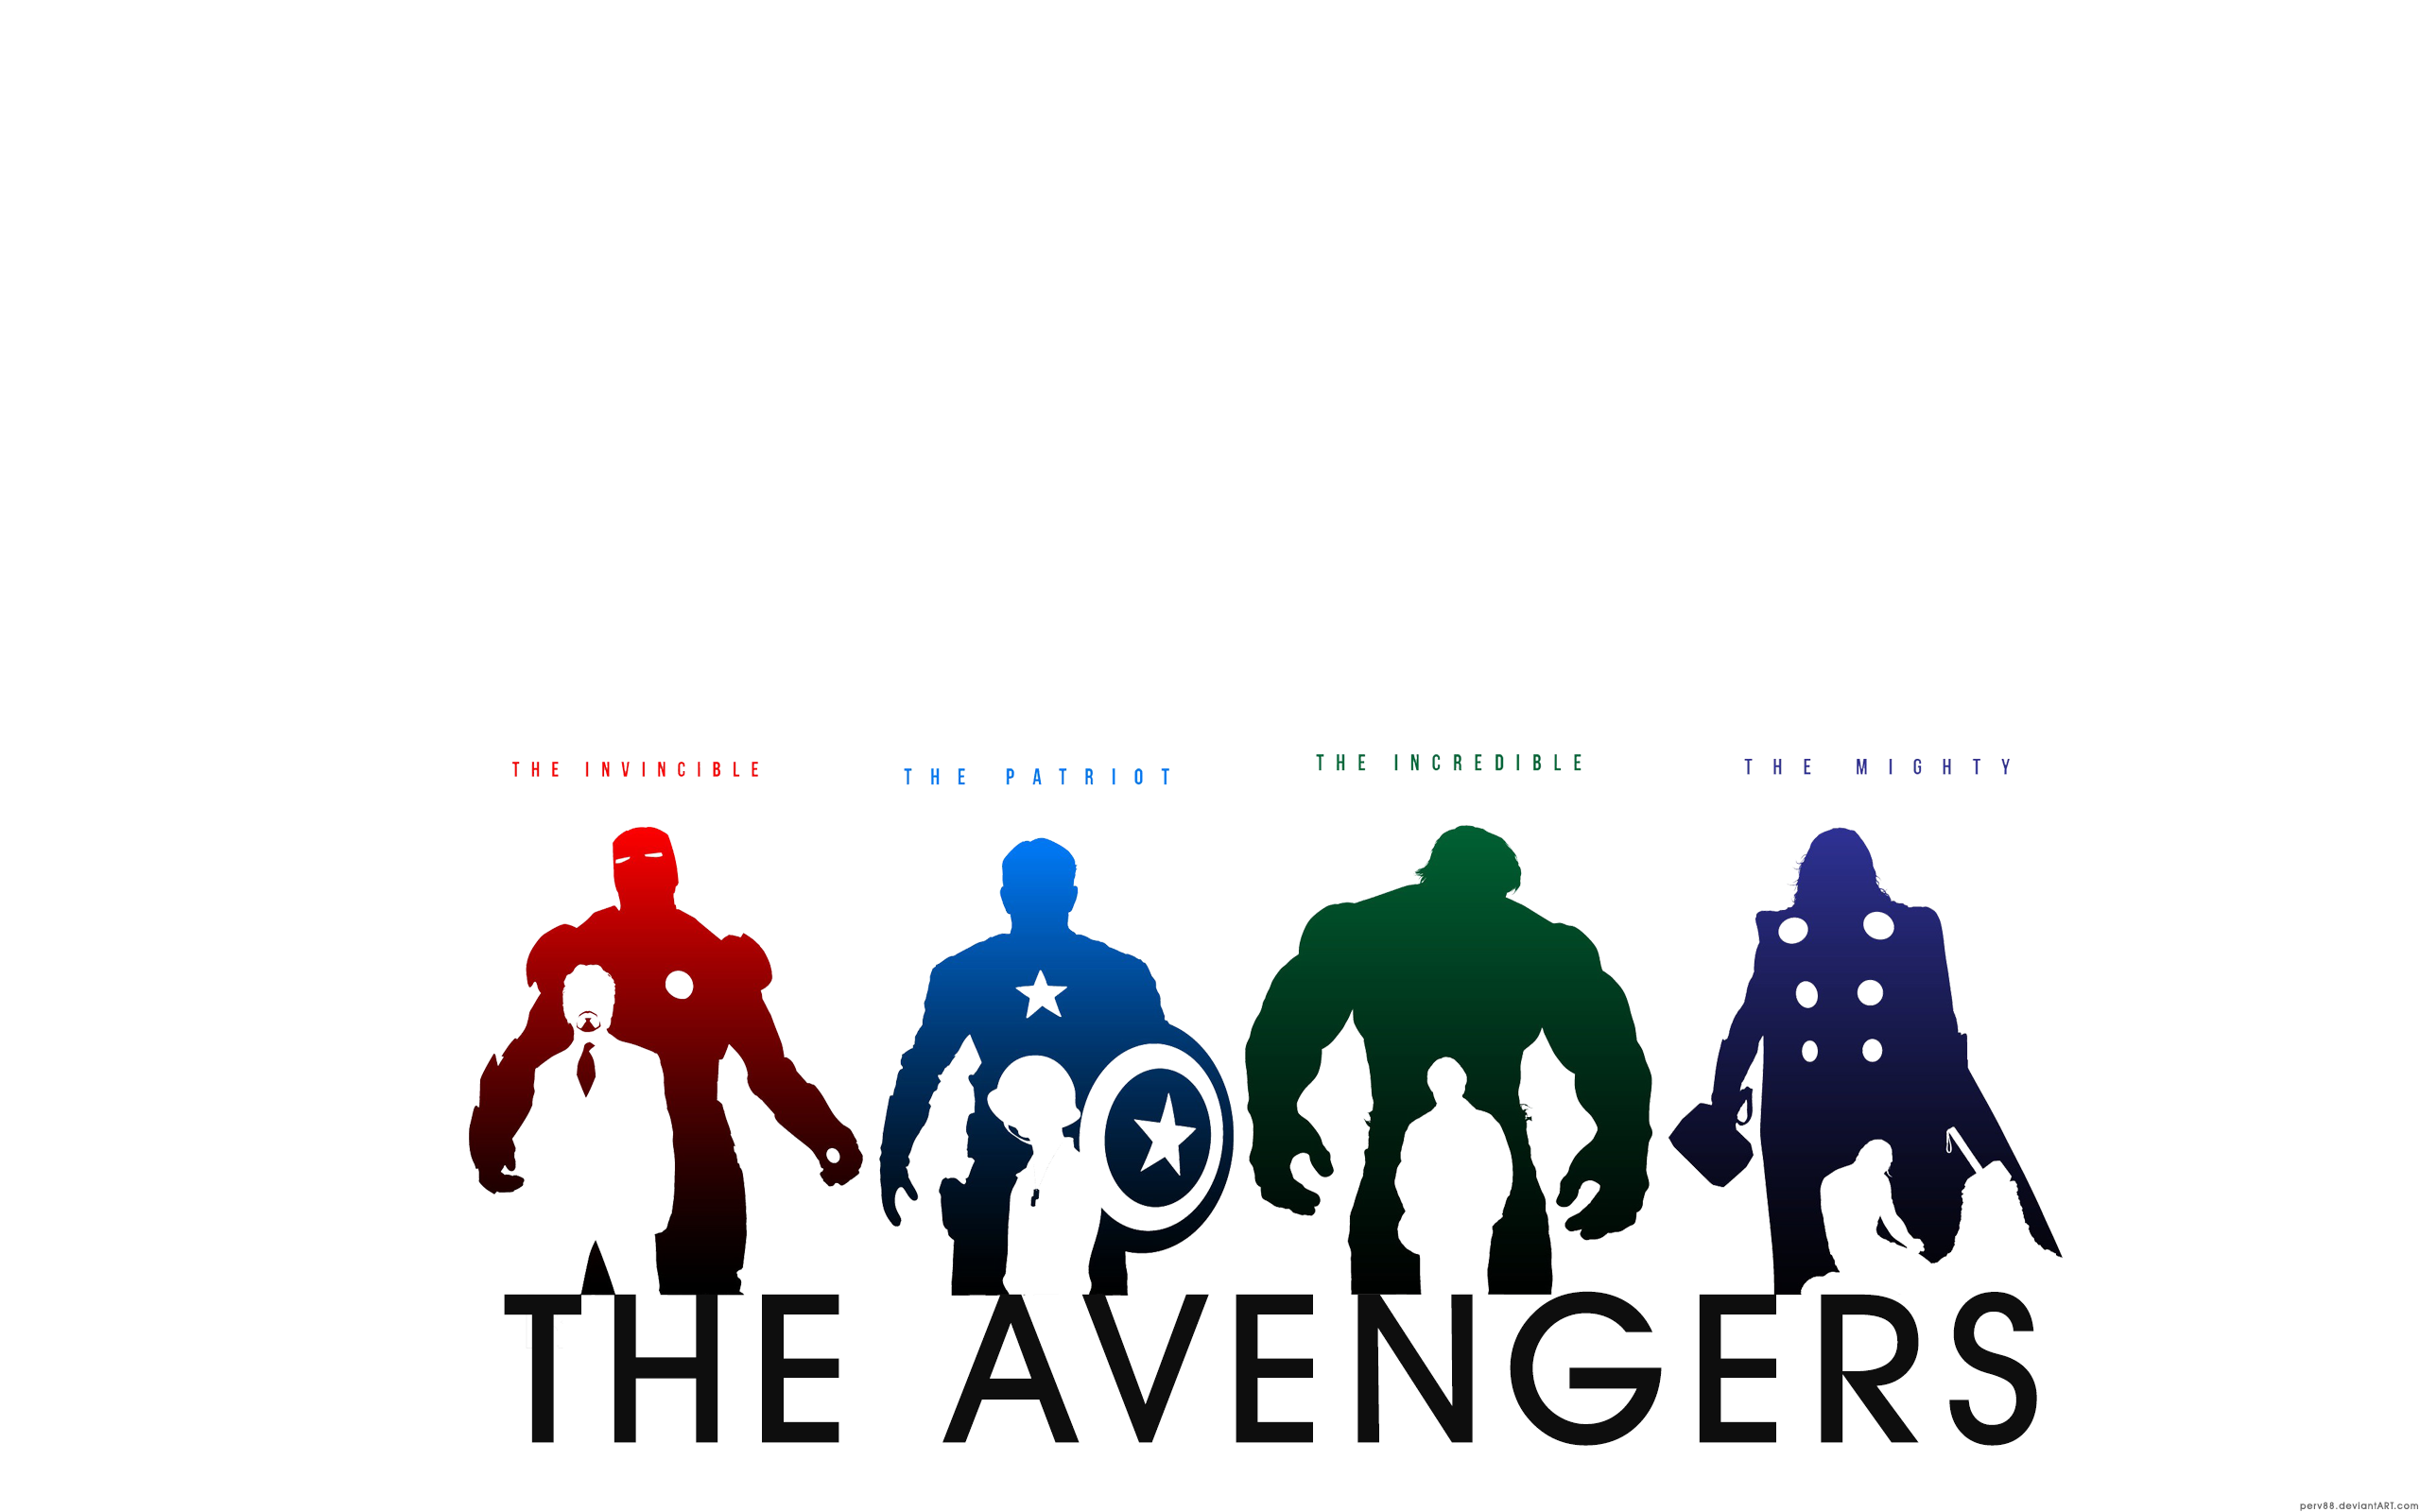 General 2560x1600 The Avengers Thor Captain America Hulk Iron Man Marvel Cinematic Universe movies simple background white background